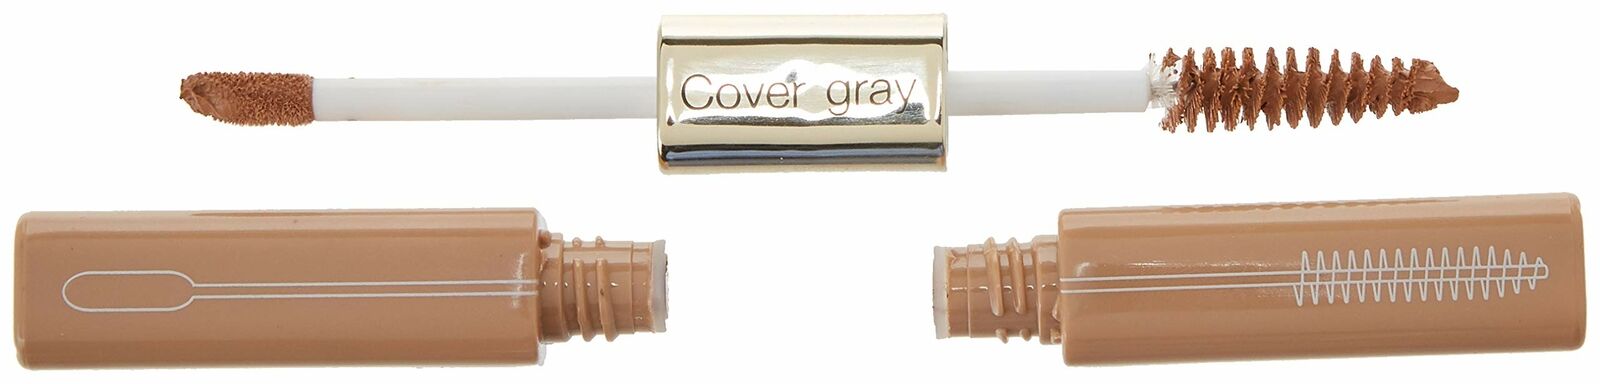 Cover Your Gray 2-in-1 Mascara Wand & Sponge Tip Applicator - Light Brown/Blonde